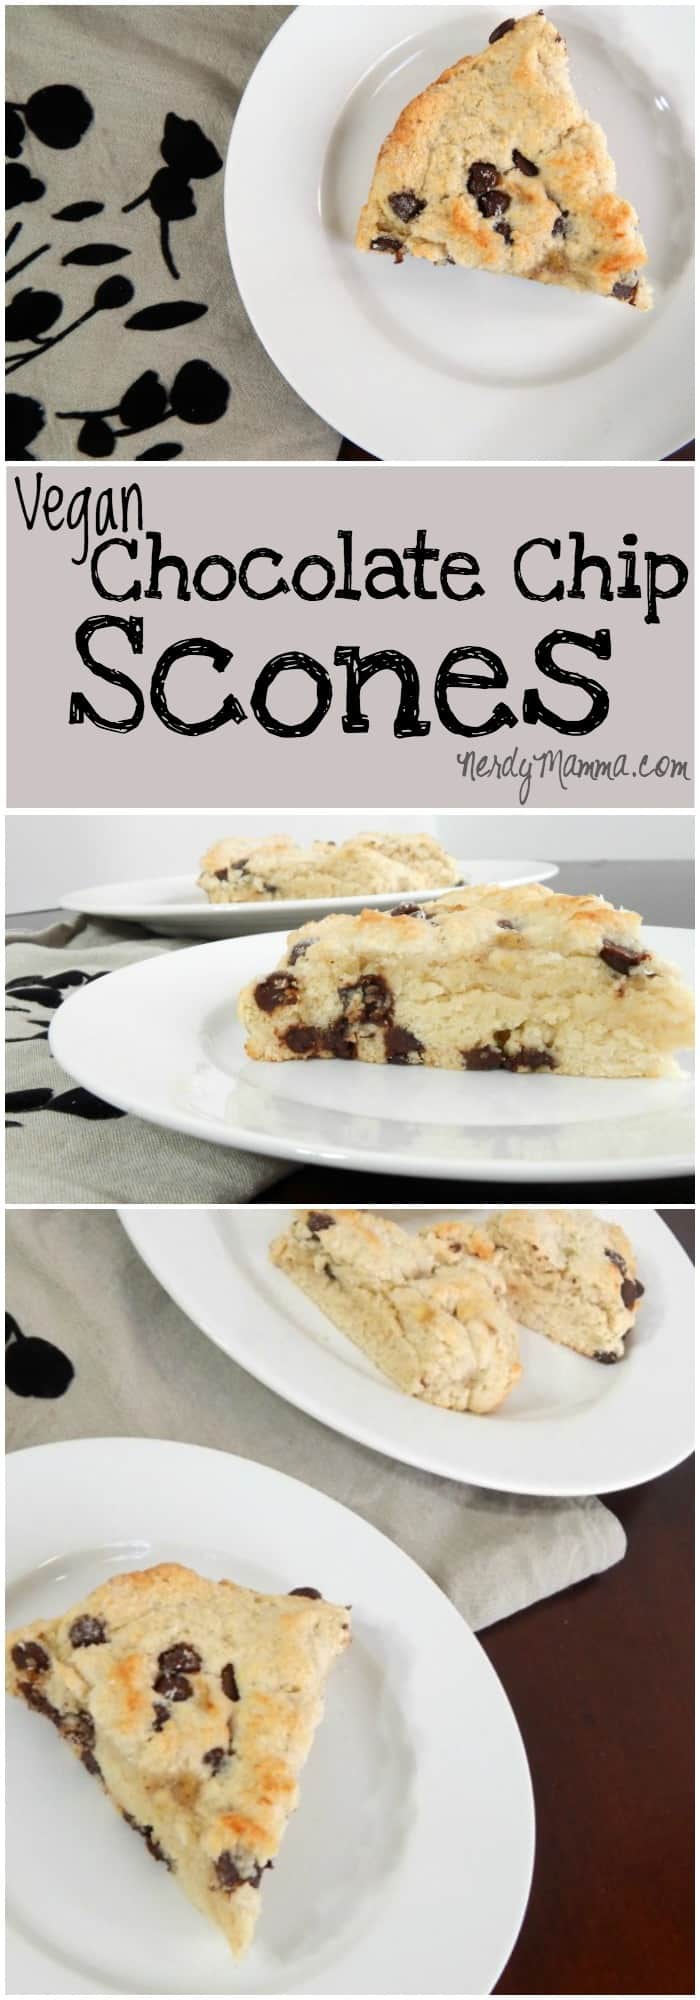 These vegan chocolate chip scones are a super-yummy breakfast. Easy for Christmas morning or any day, really. Soft, fluffy, dotted with chocolate, dairy-free and eggless, they're perfect in every way.